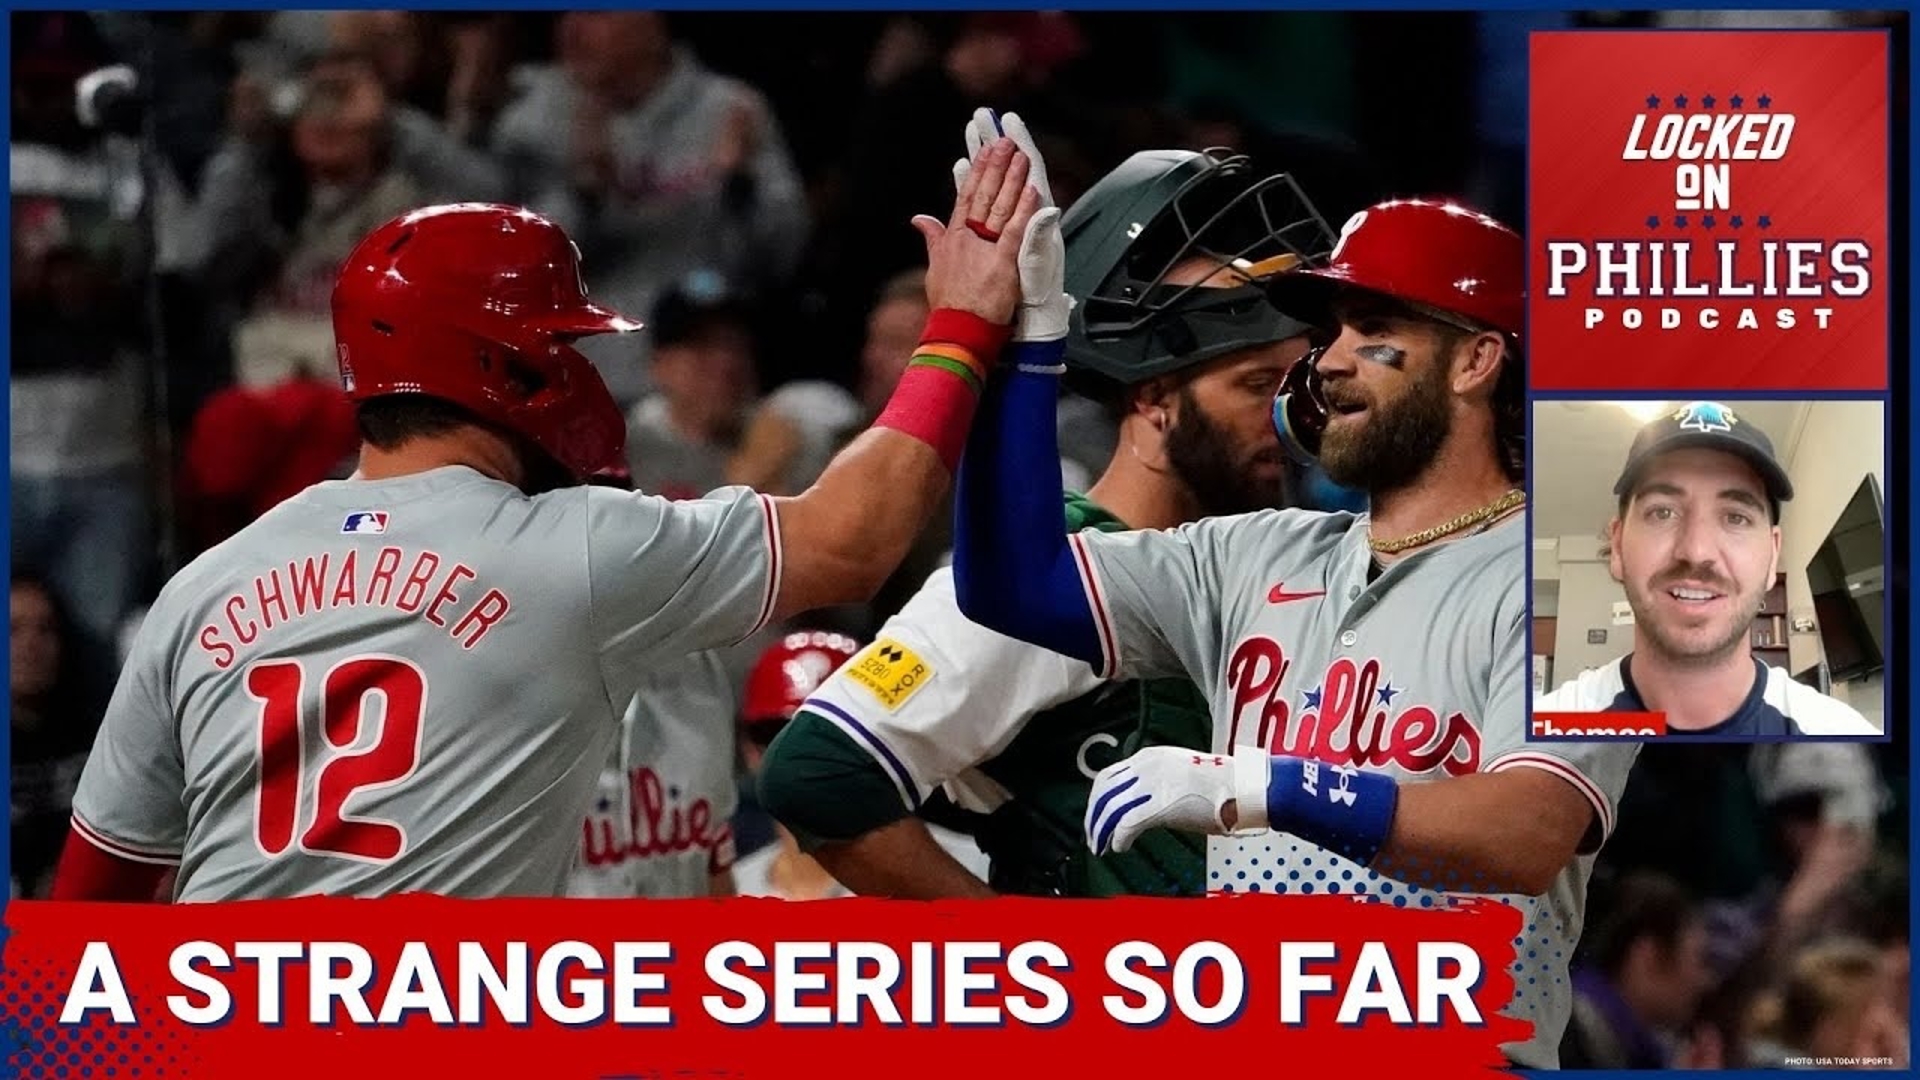 In today's episode, Connor reacts to a weird couple of games to start the Philadelphia Phillies series on the road against the Colorado Rockies.